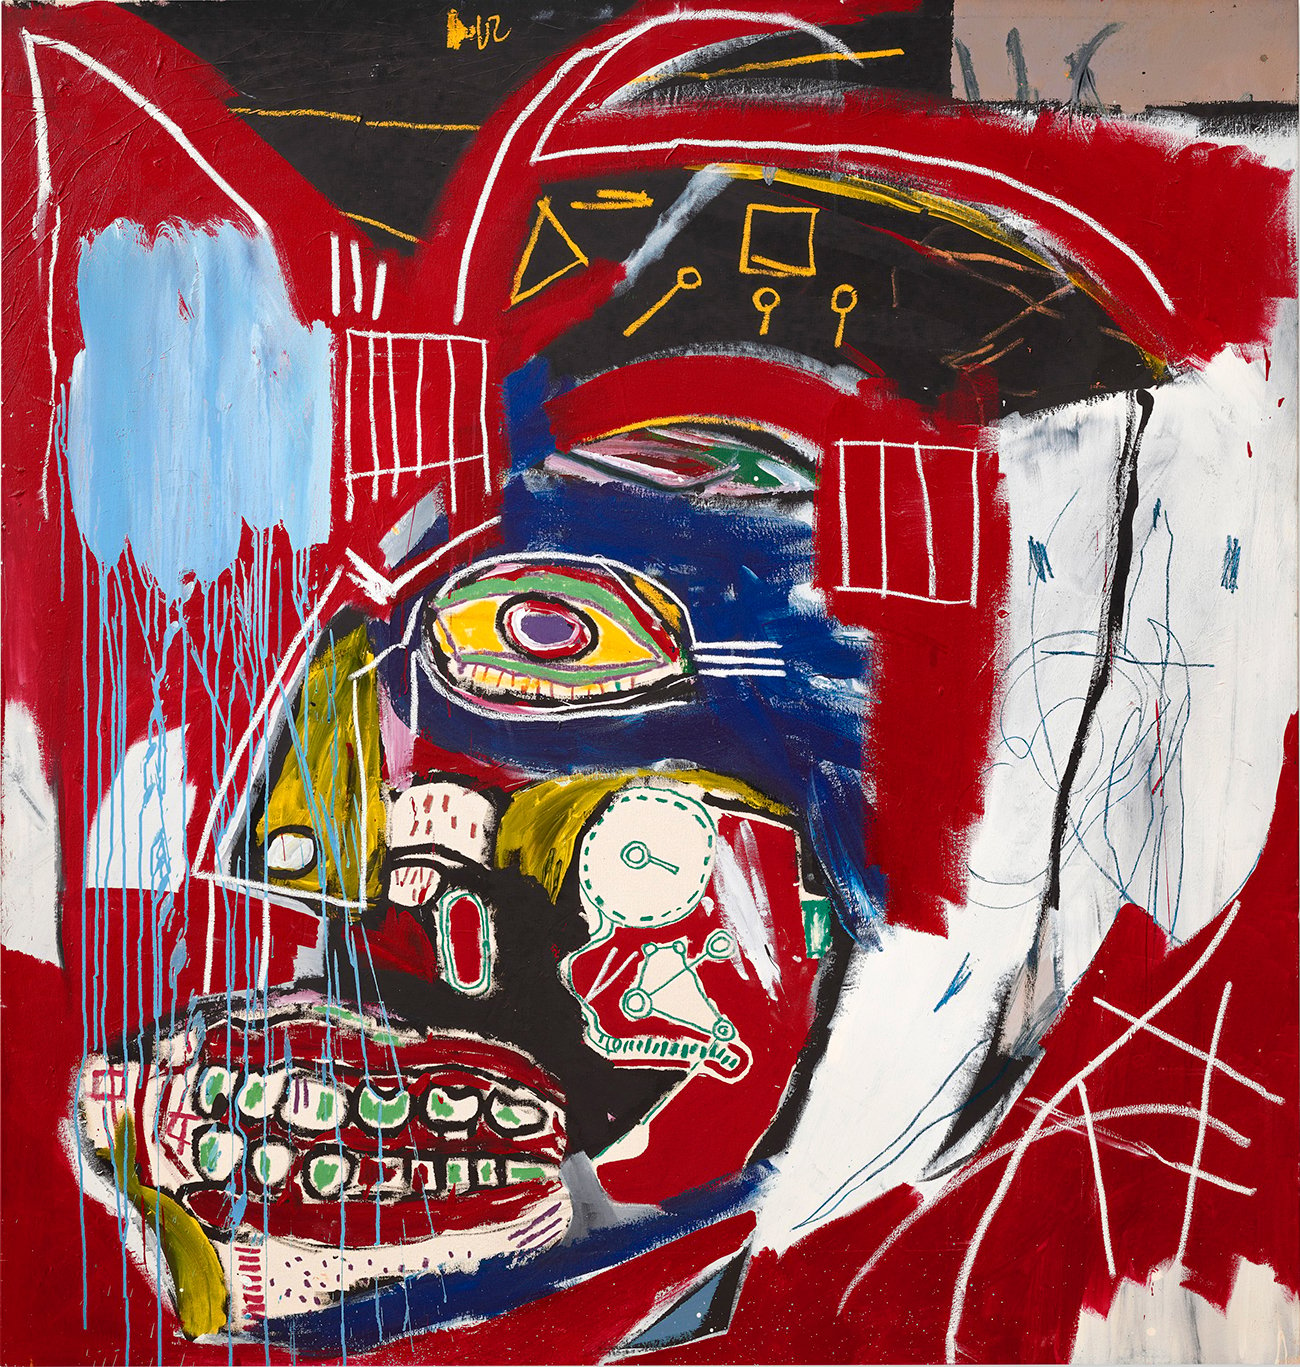 The painting shows a distorted and fractured skull with a single eye, set against a red and black background. The skull has various symbols and shapes on it, such as dials, arrows, and eyes, that may represent Basquiat’s thoughts and feelings about life, death, identity, and society. The painting is signed by Basquiat with his initials “Mz” in the top left corner.